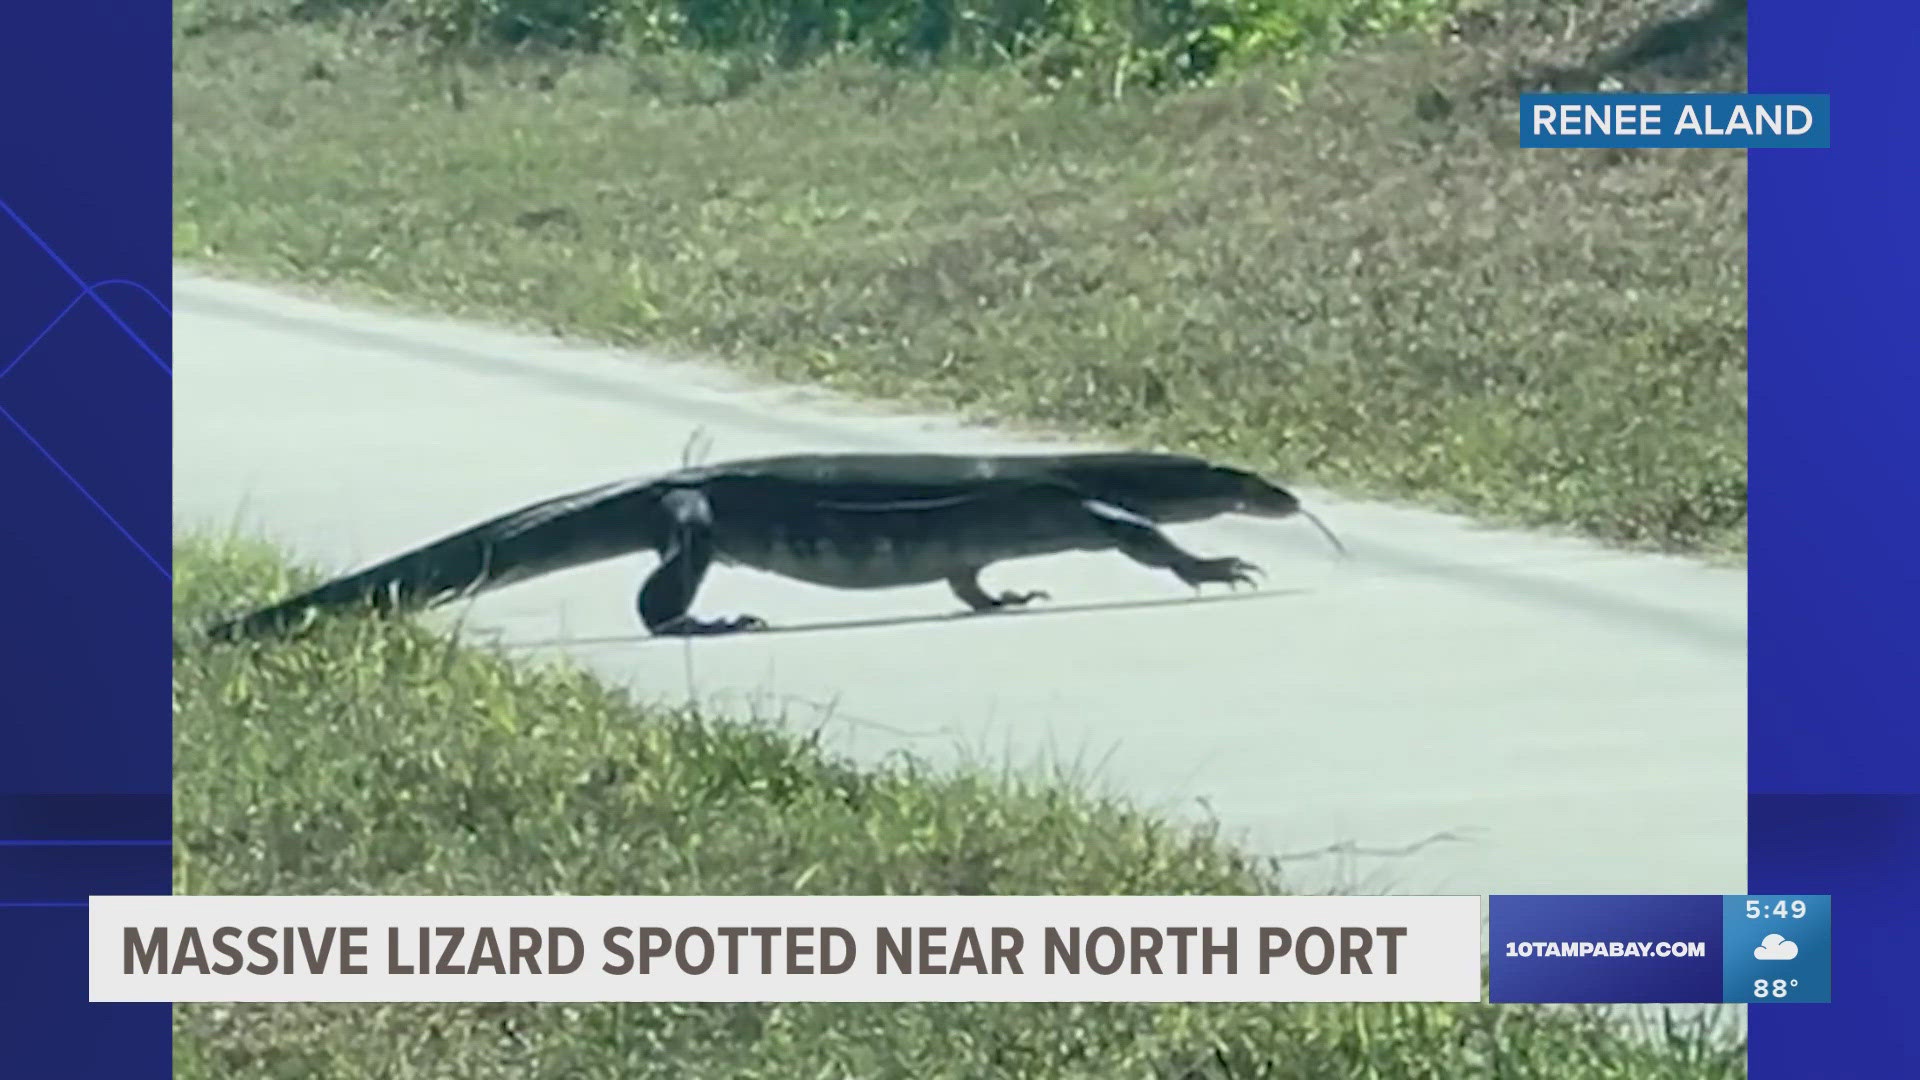 "I looked over and saw what I thought, at first, was a gator," Renee Aland said.